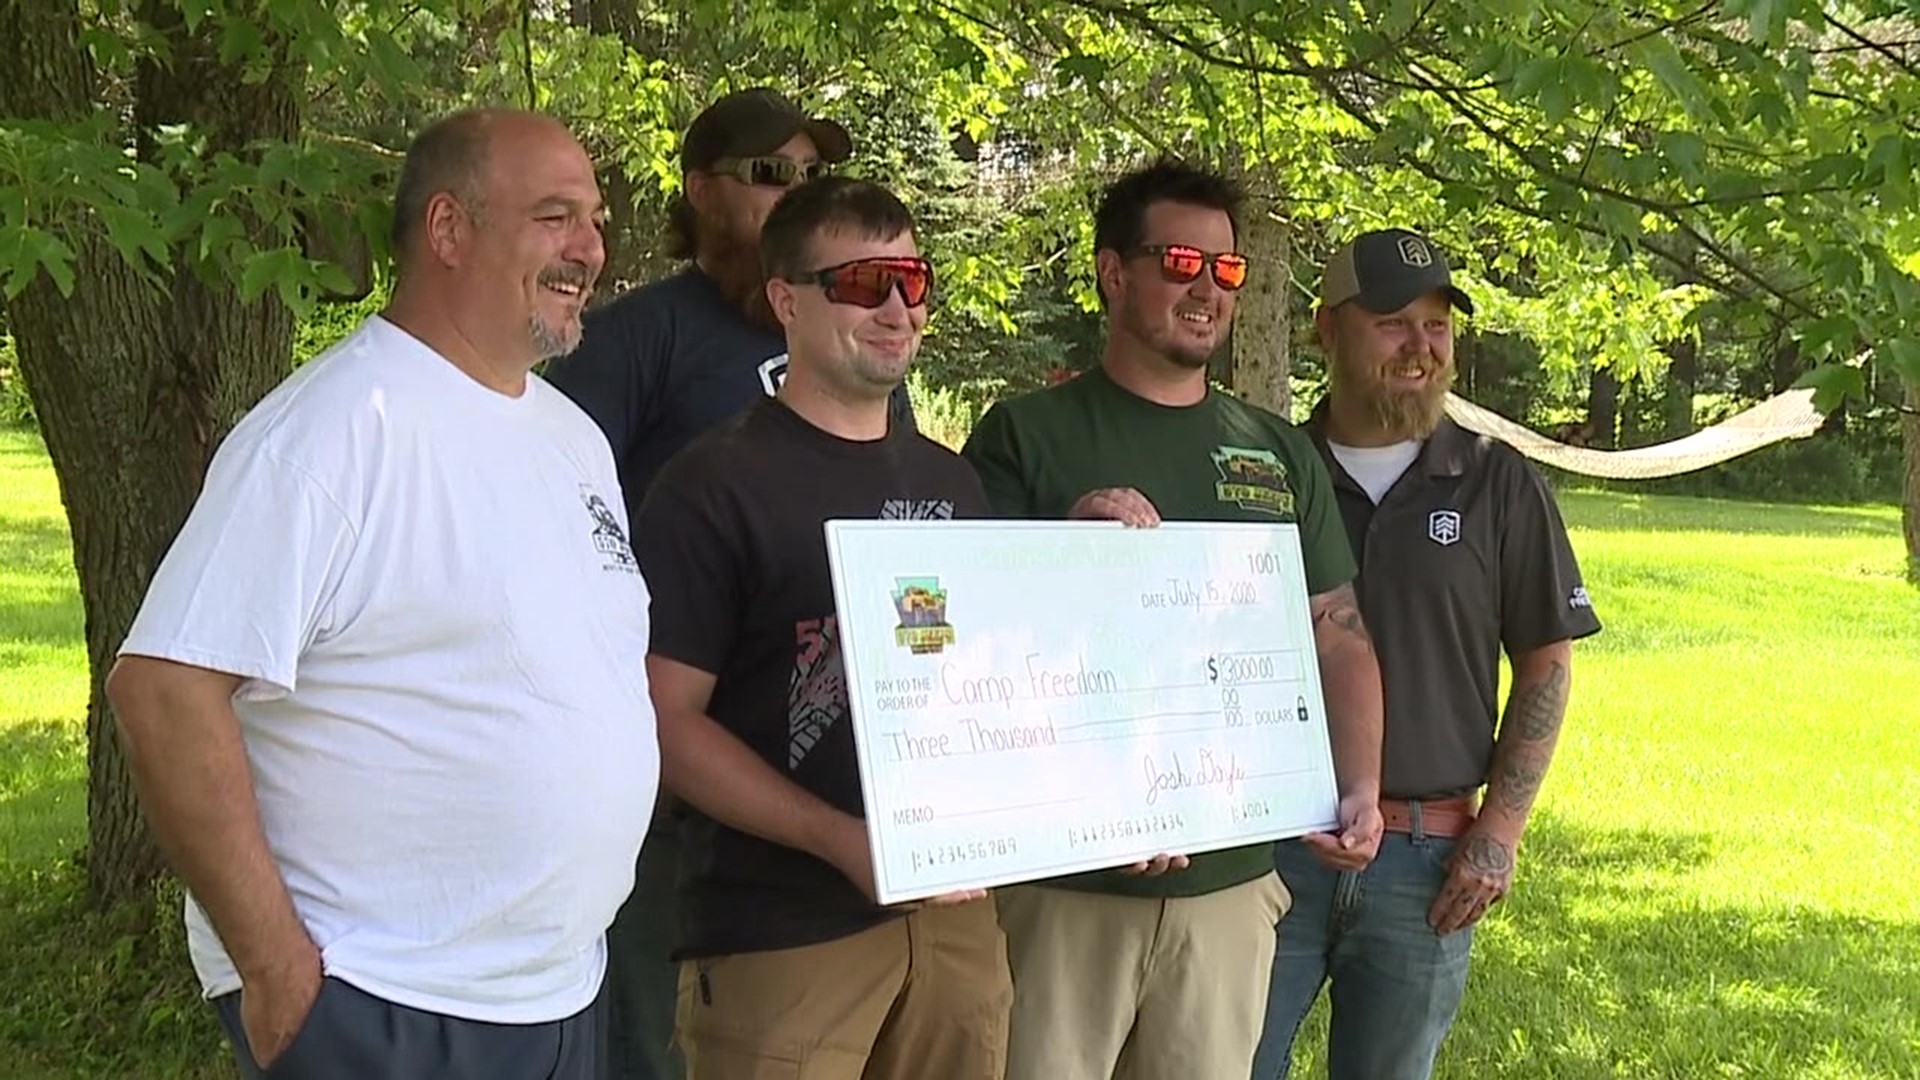 The group 570 Jeeps handed over a check for $3,000 to Camp Freedom.